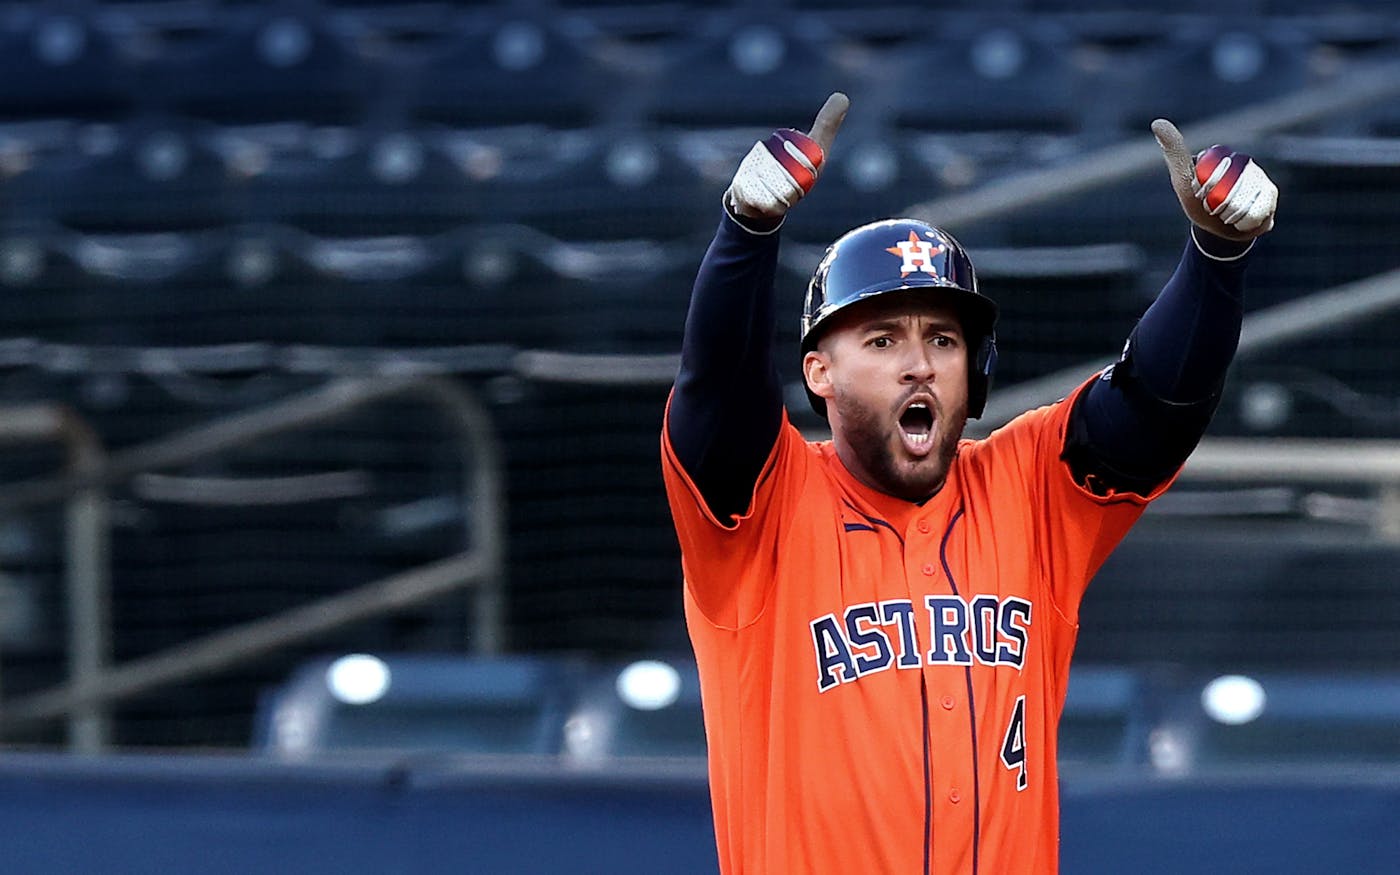 Ex-MVP has message to haters about Jose Altuve